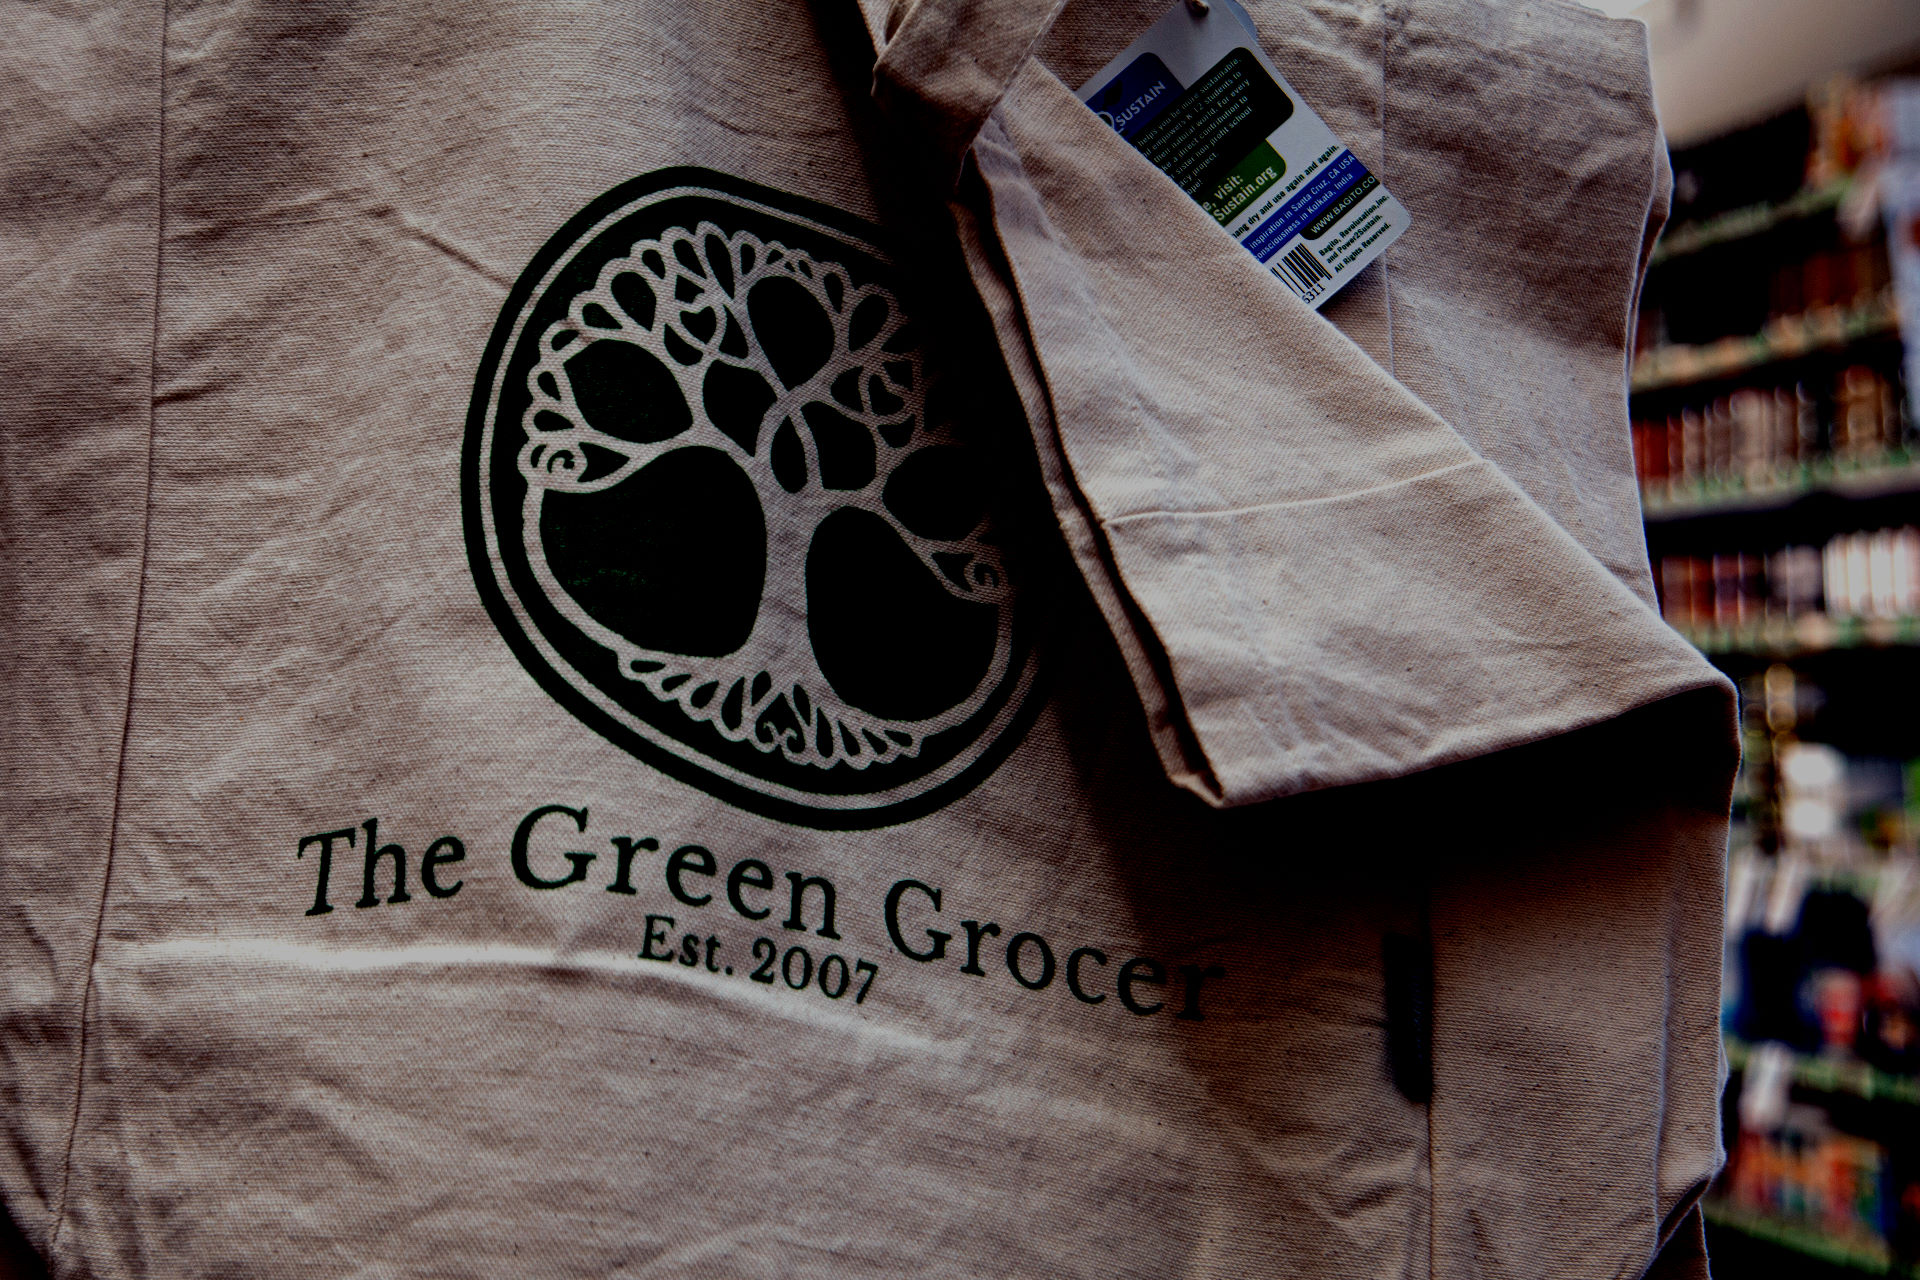 The Green Grocer bag